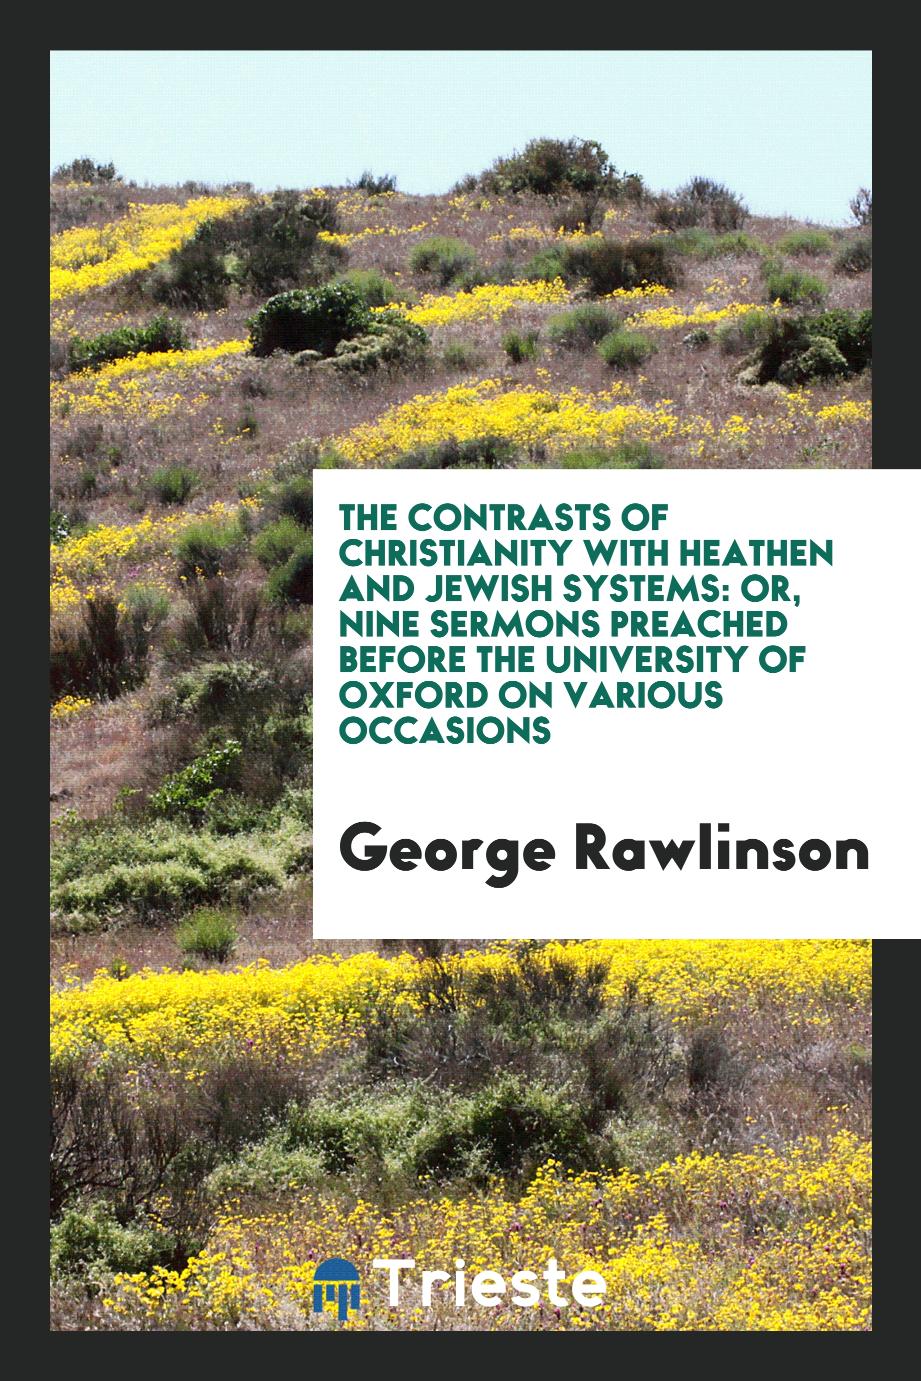 The Contrasts of Christianity with Heathen and Jewish Systems: Or, Nine Sermons Preached Before the University of Oxford on Various Occasions